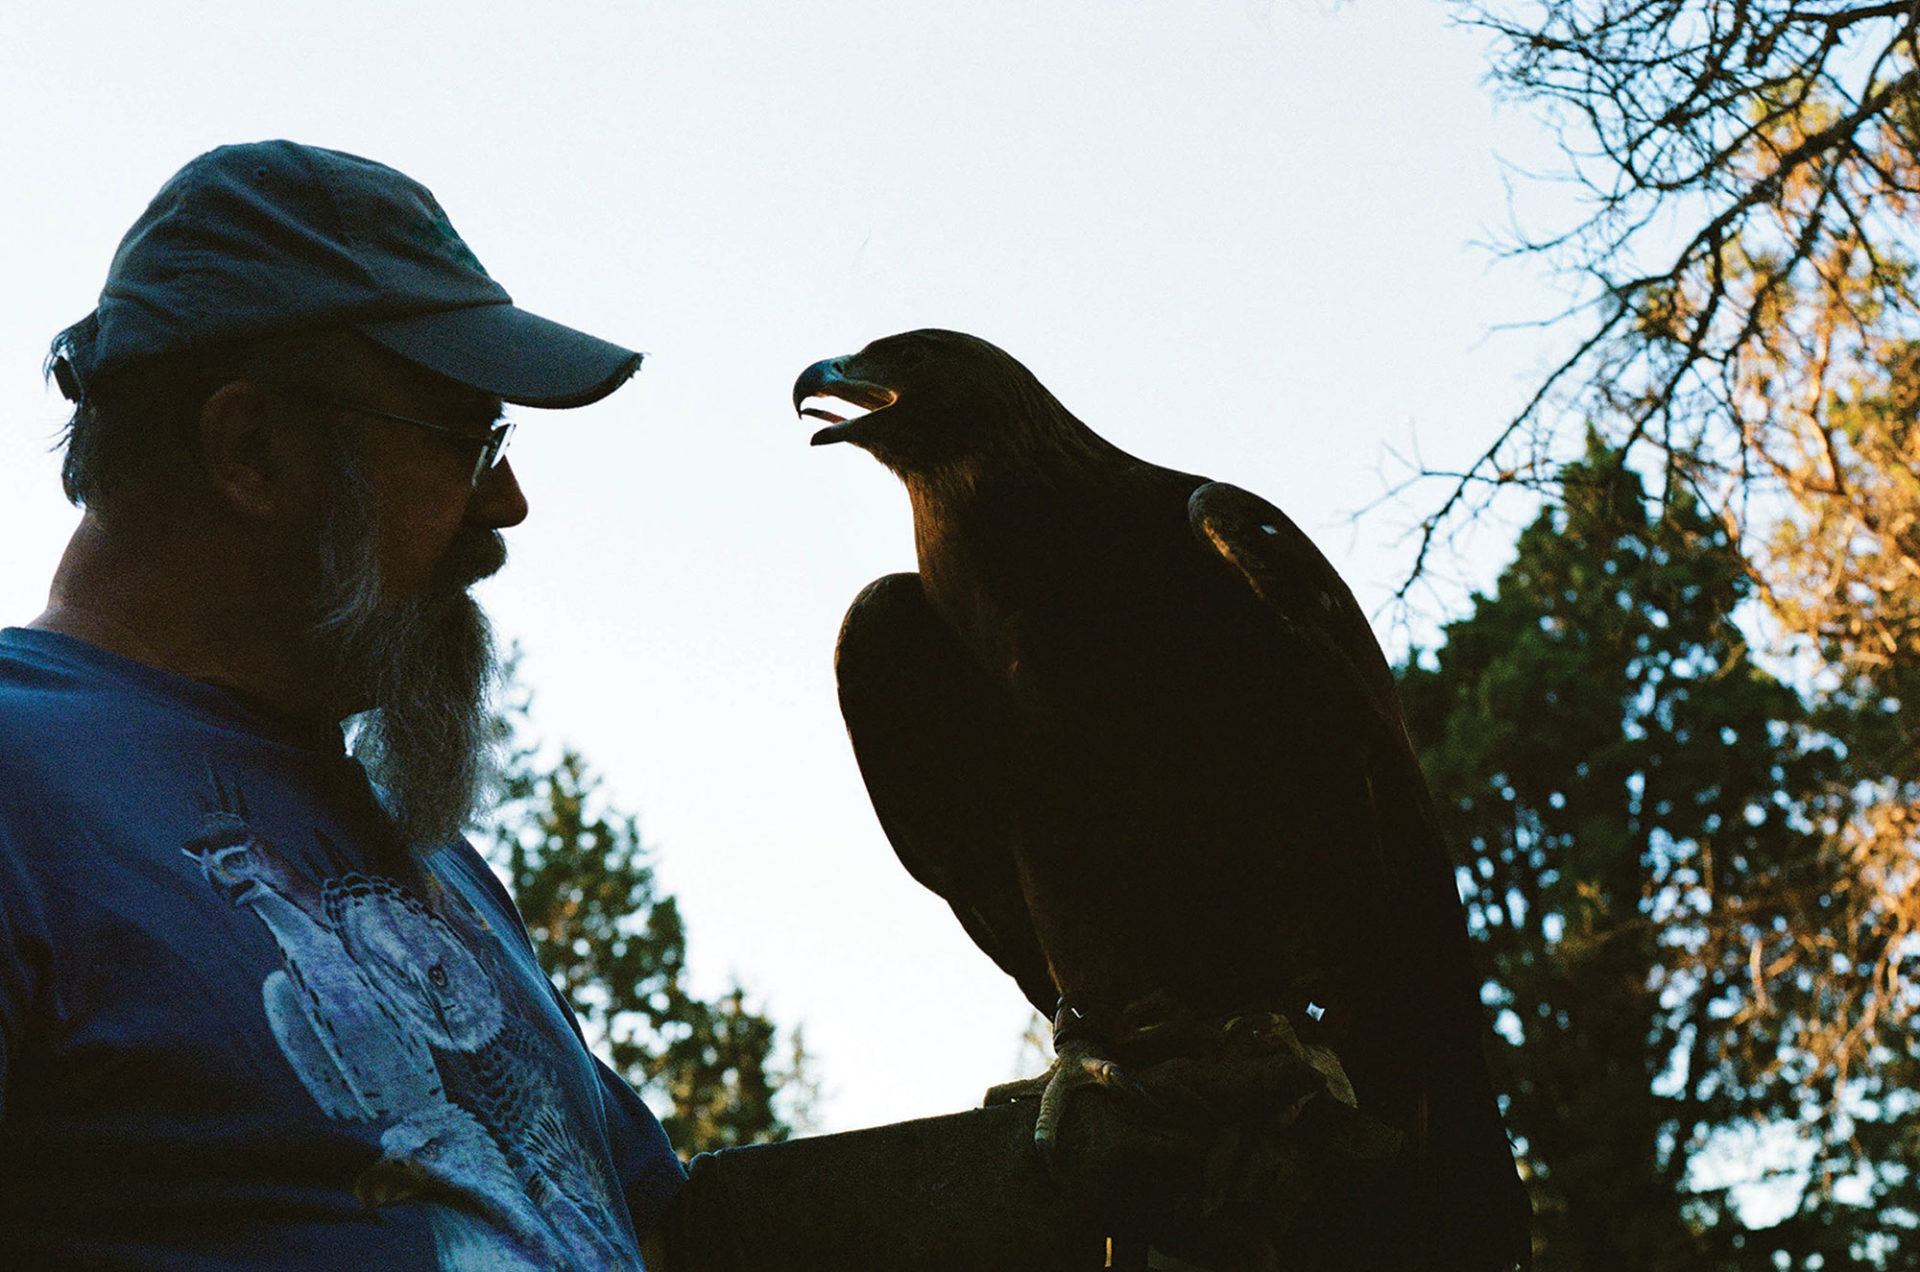 Shadowed image of man wearing a hat, has a beard and glasses—holding a falcon in his left hand.